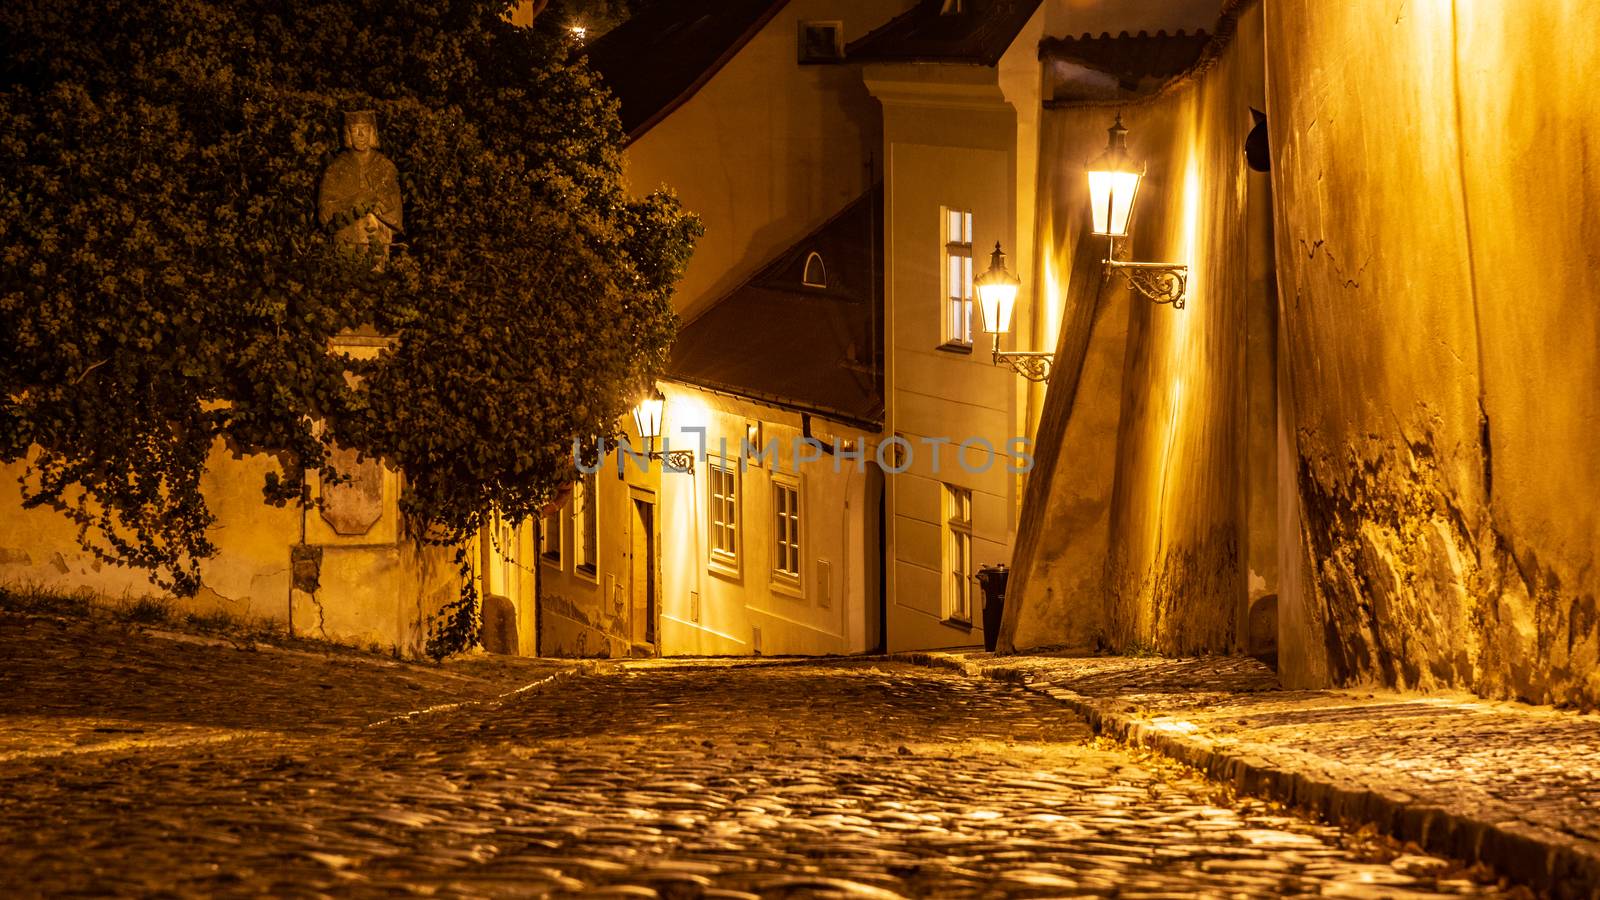 Narrow cobbled street in old medieval town with illuminated houses by vintage street lamps, Novy svet, Prague, Czech Republic. Night shot by pyty